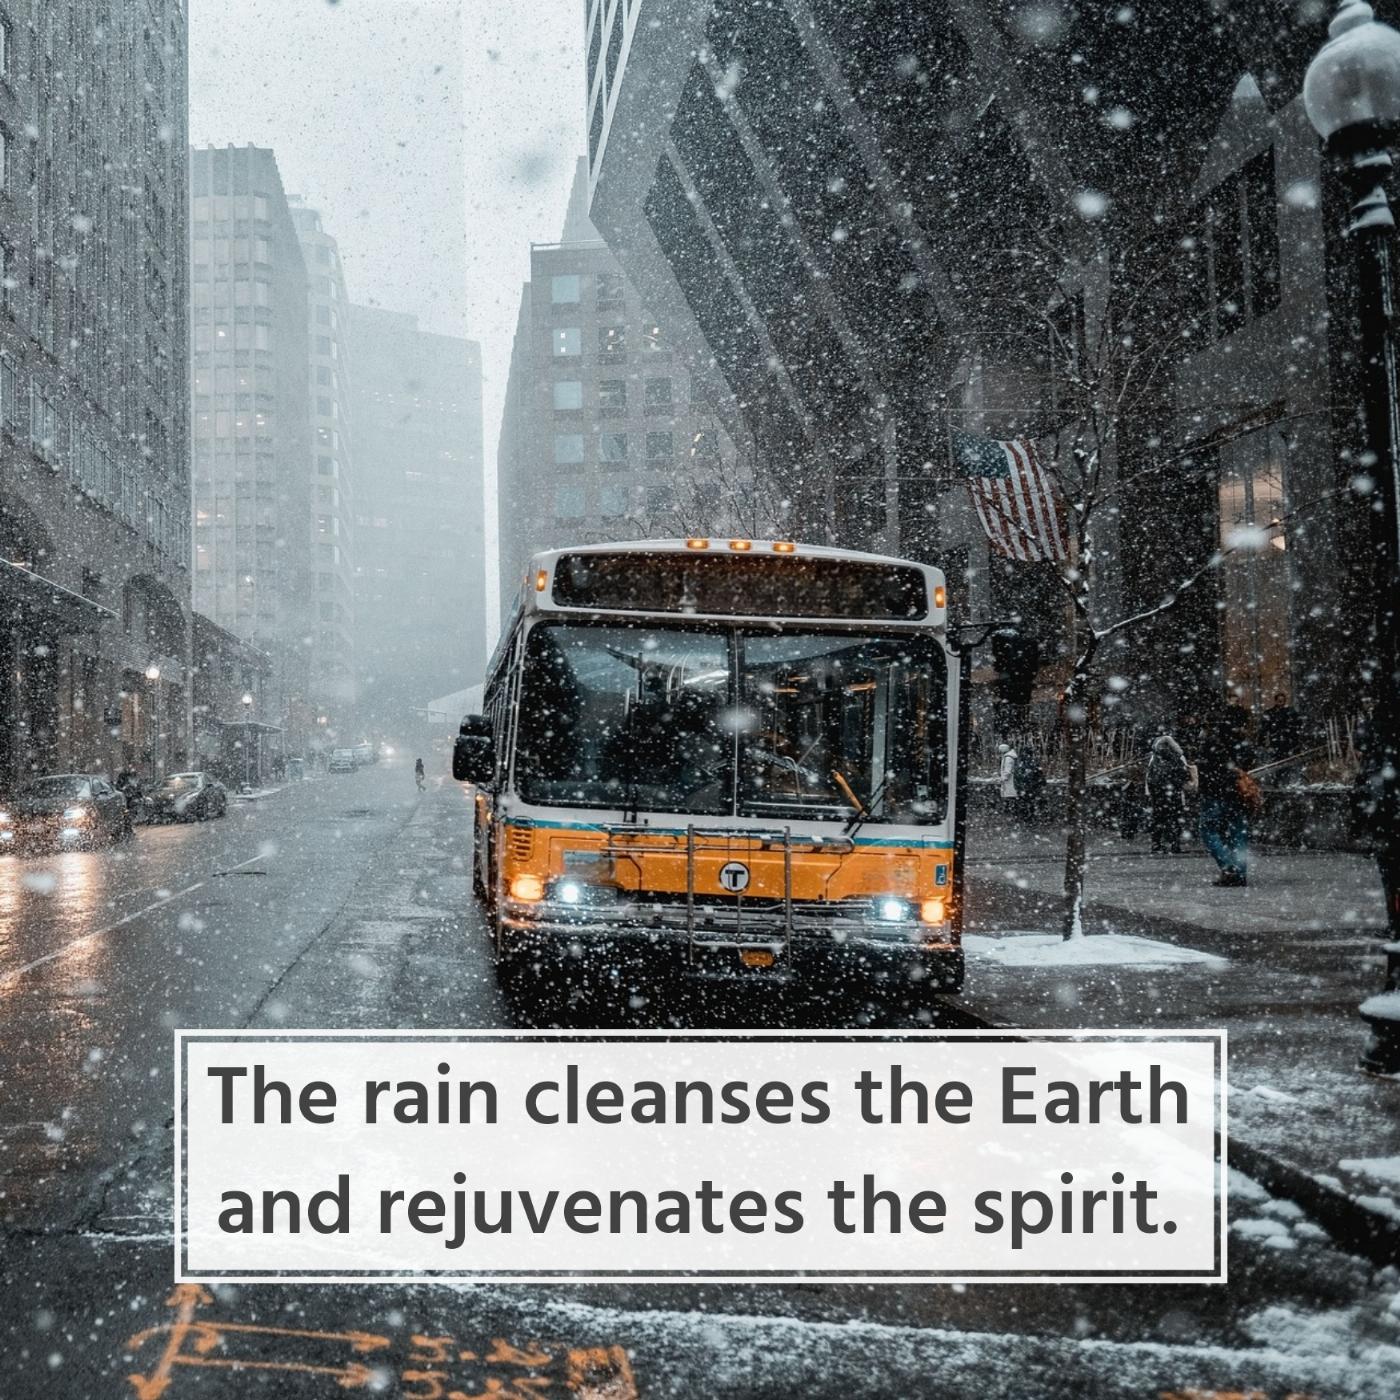 The rain cleanses the Earth and rejuvenates the spirit